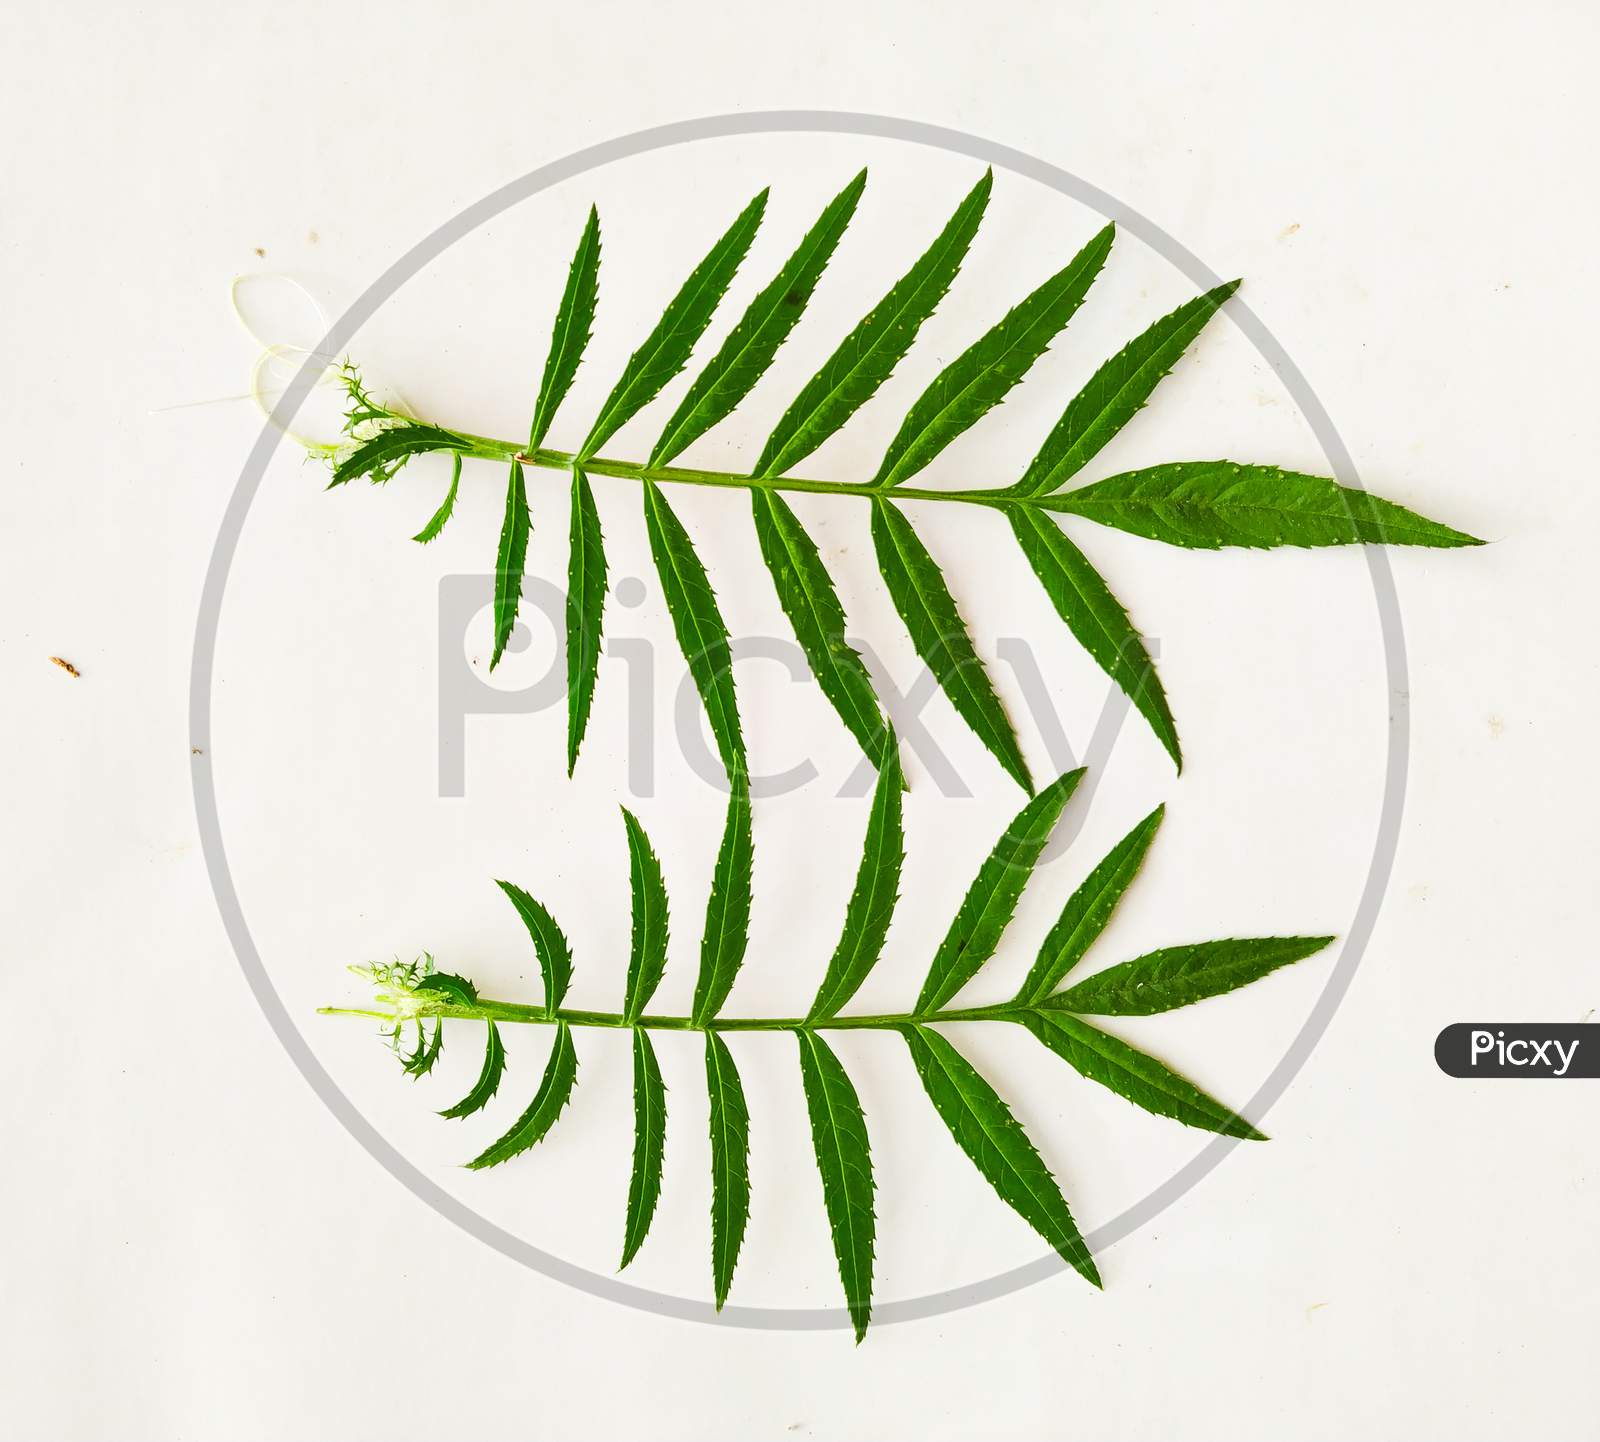 Photo Of Marigold Leaf In A White Background